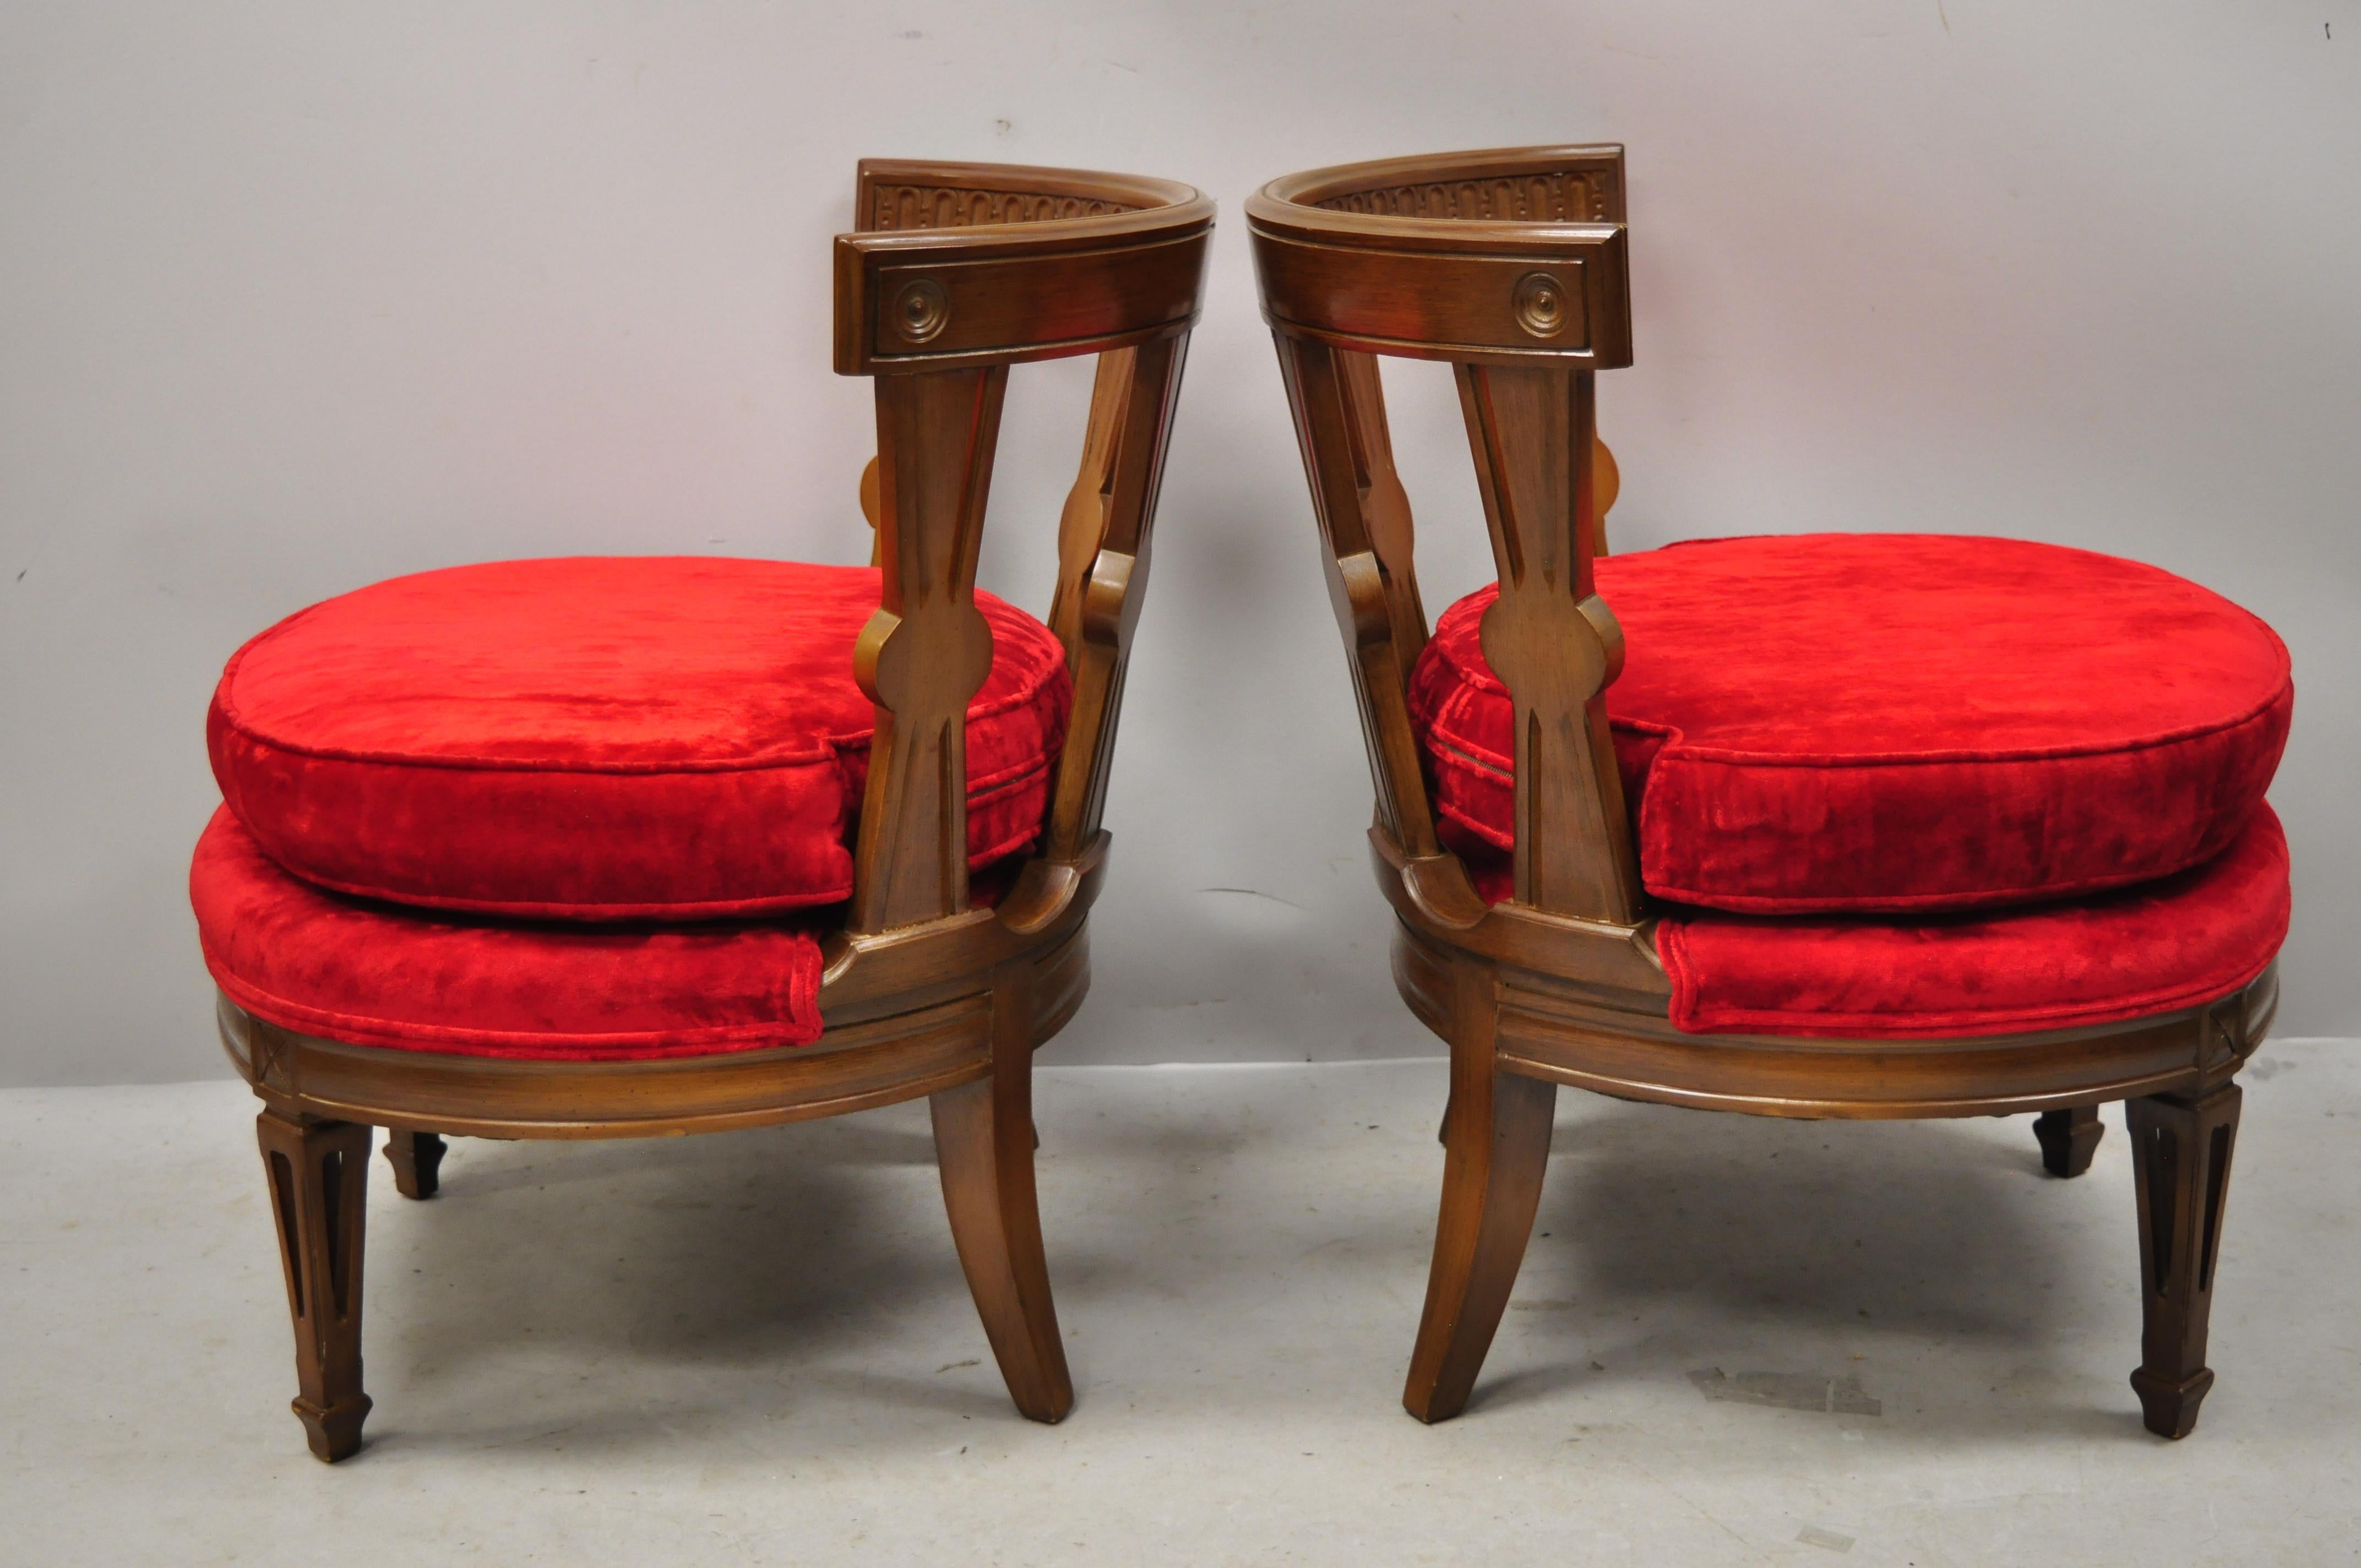  Hollywood Regency Italian Low Barrel Back Red Slipper Lounge Chairs - a Pair 3